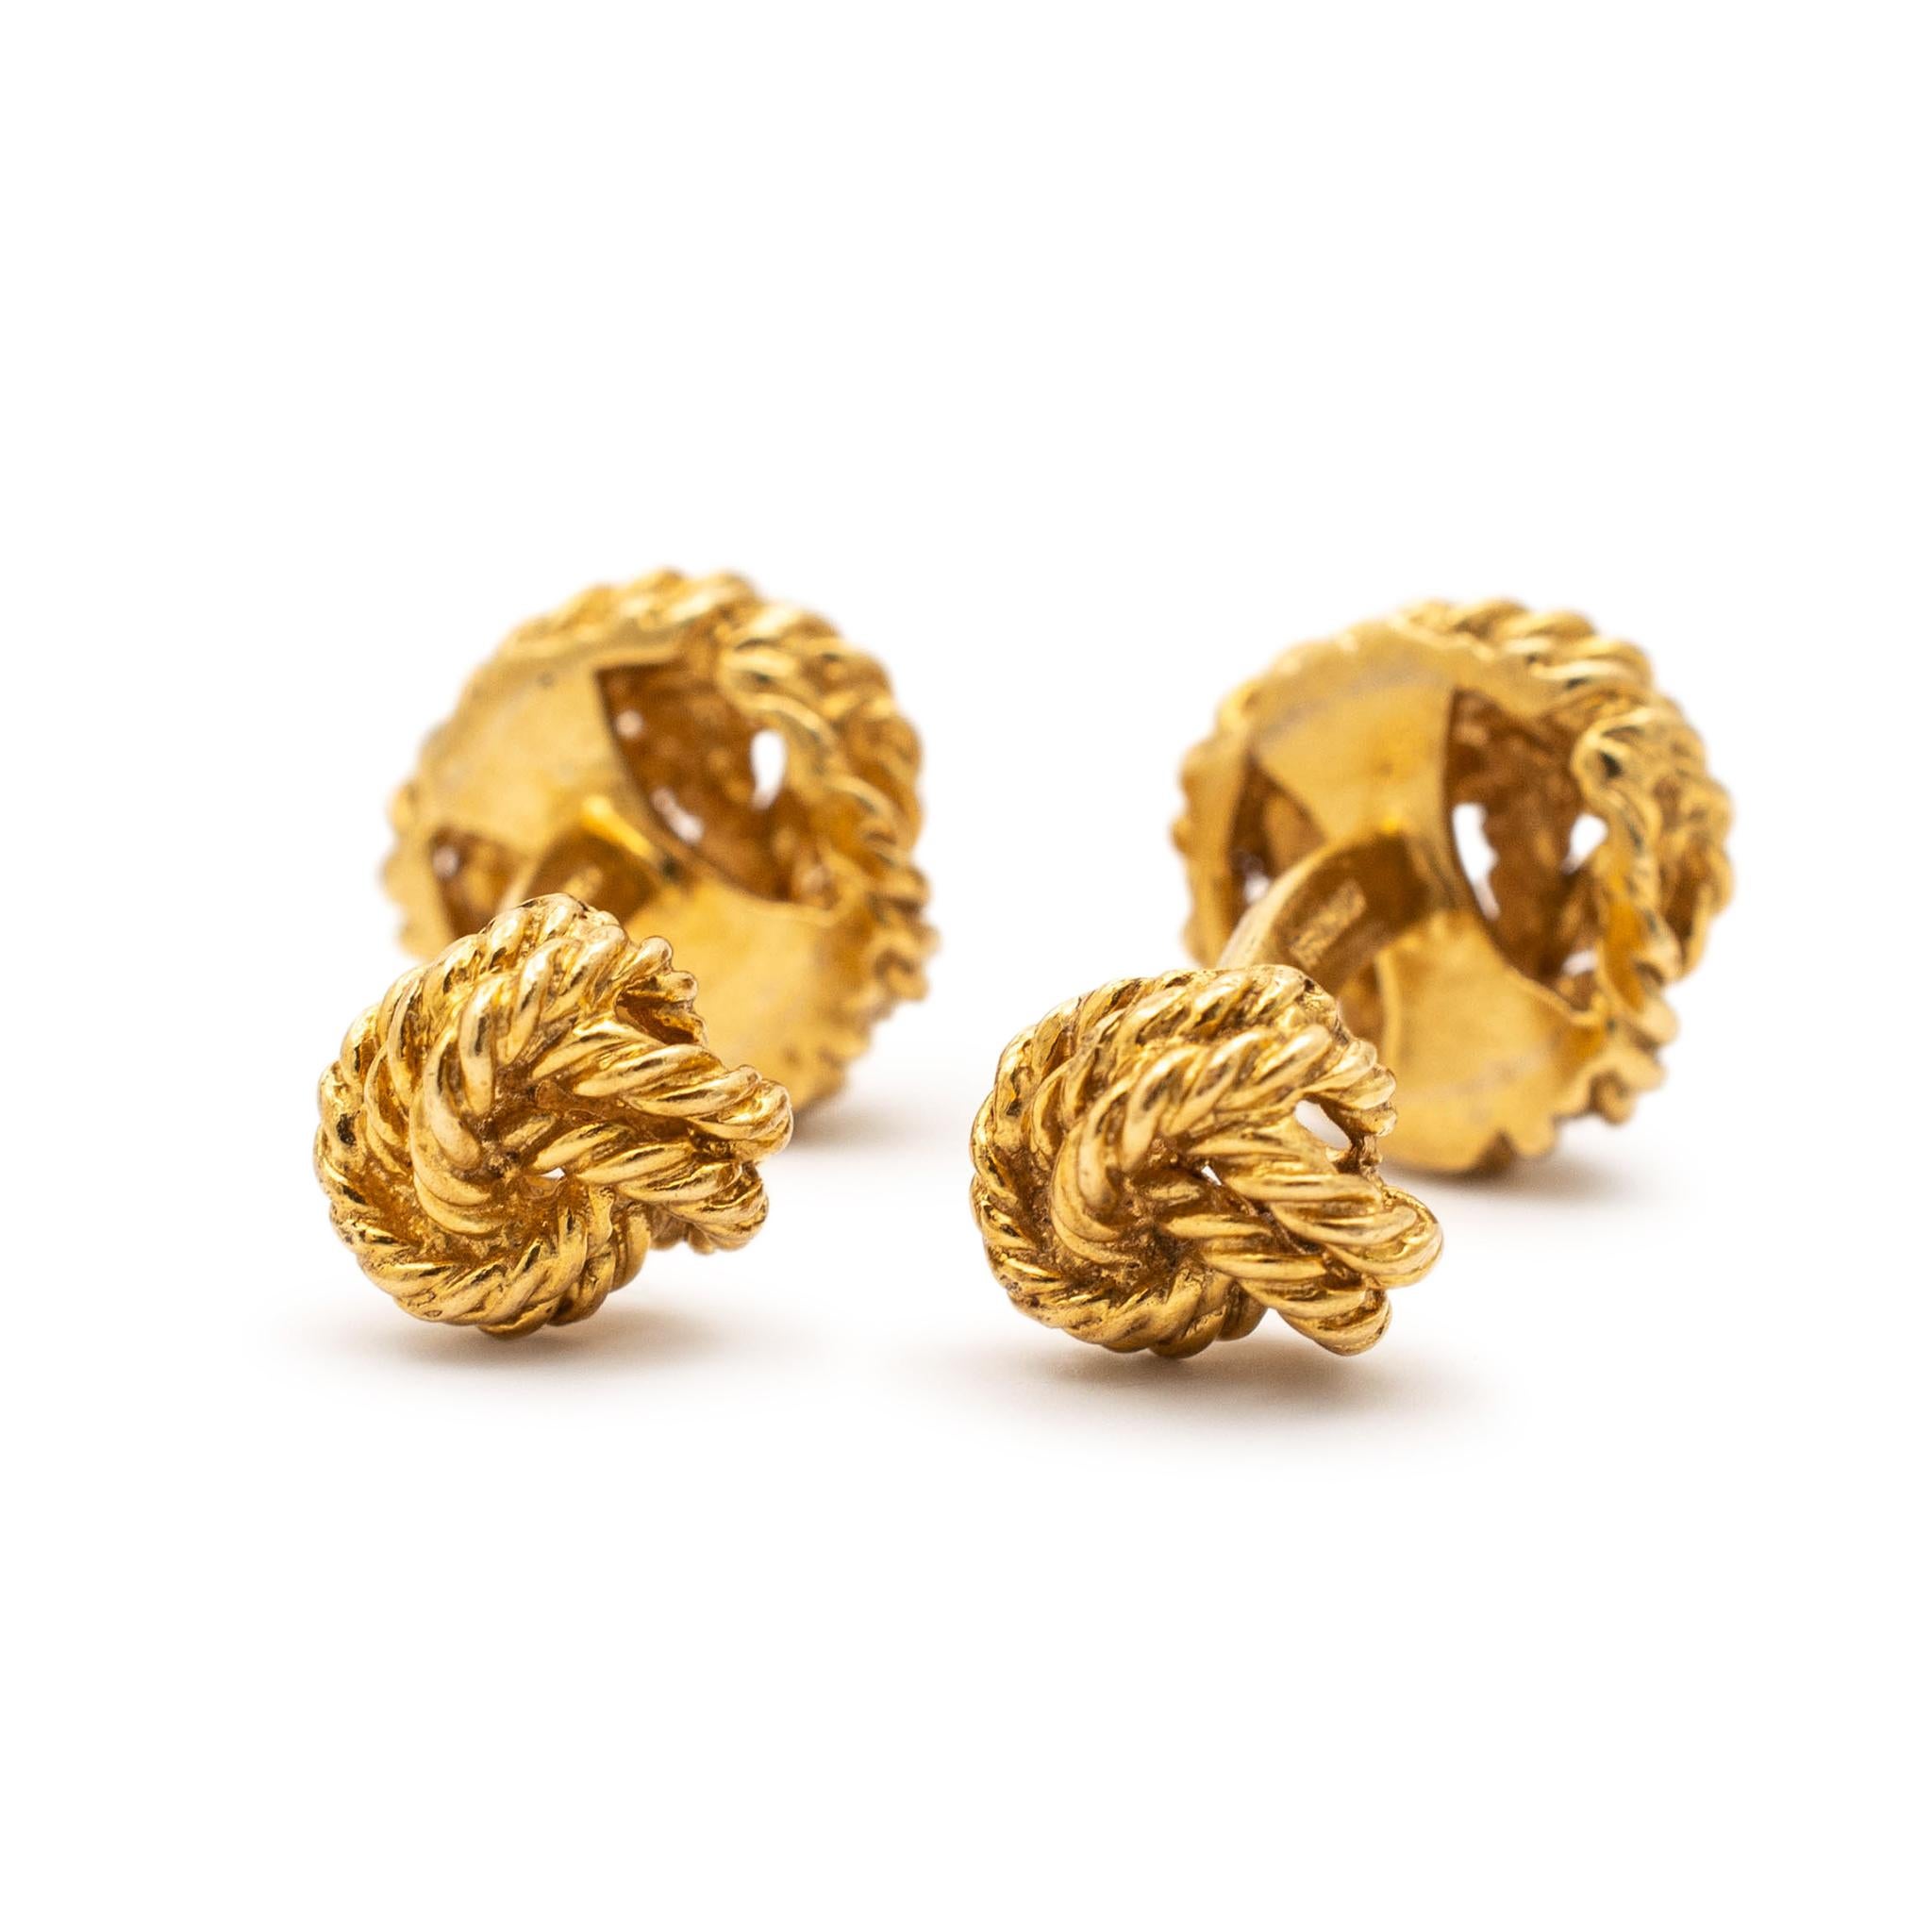 Brand: Tiffany & Co.

Material: 18K Yellow Gold

Length: 1.00 inches

Diameter: 14.20 mm

Weight: 14.40 grams

One pair 18K yellow gold knotted cufflinks. Engraved with 